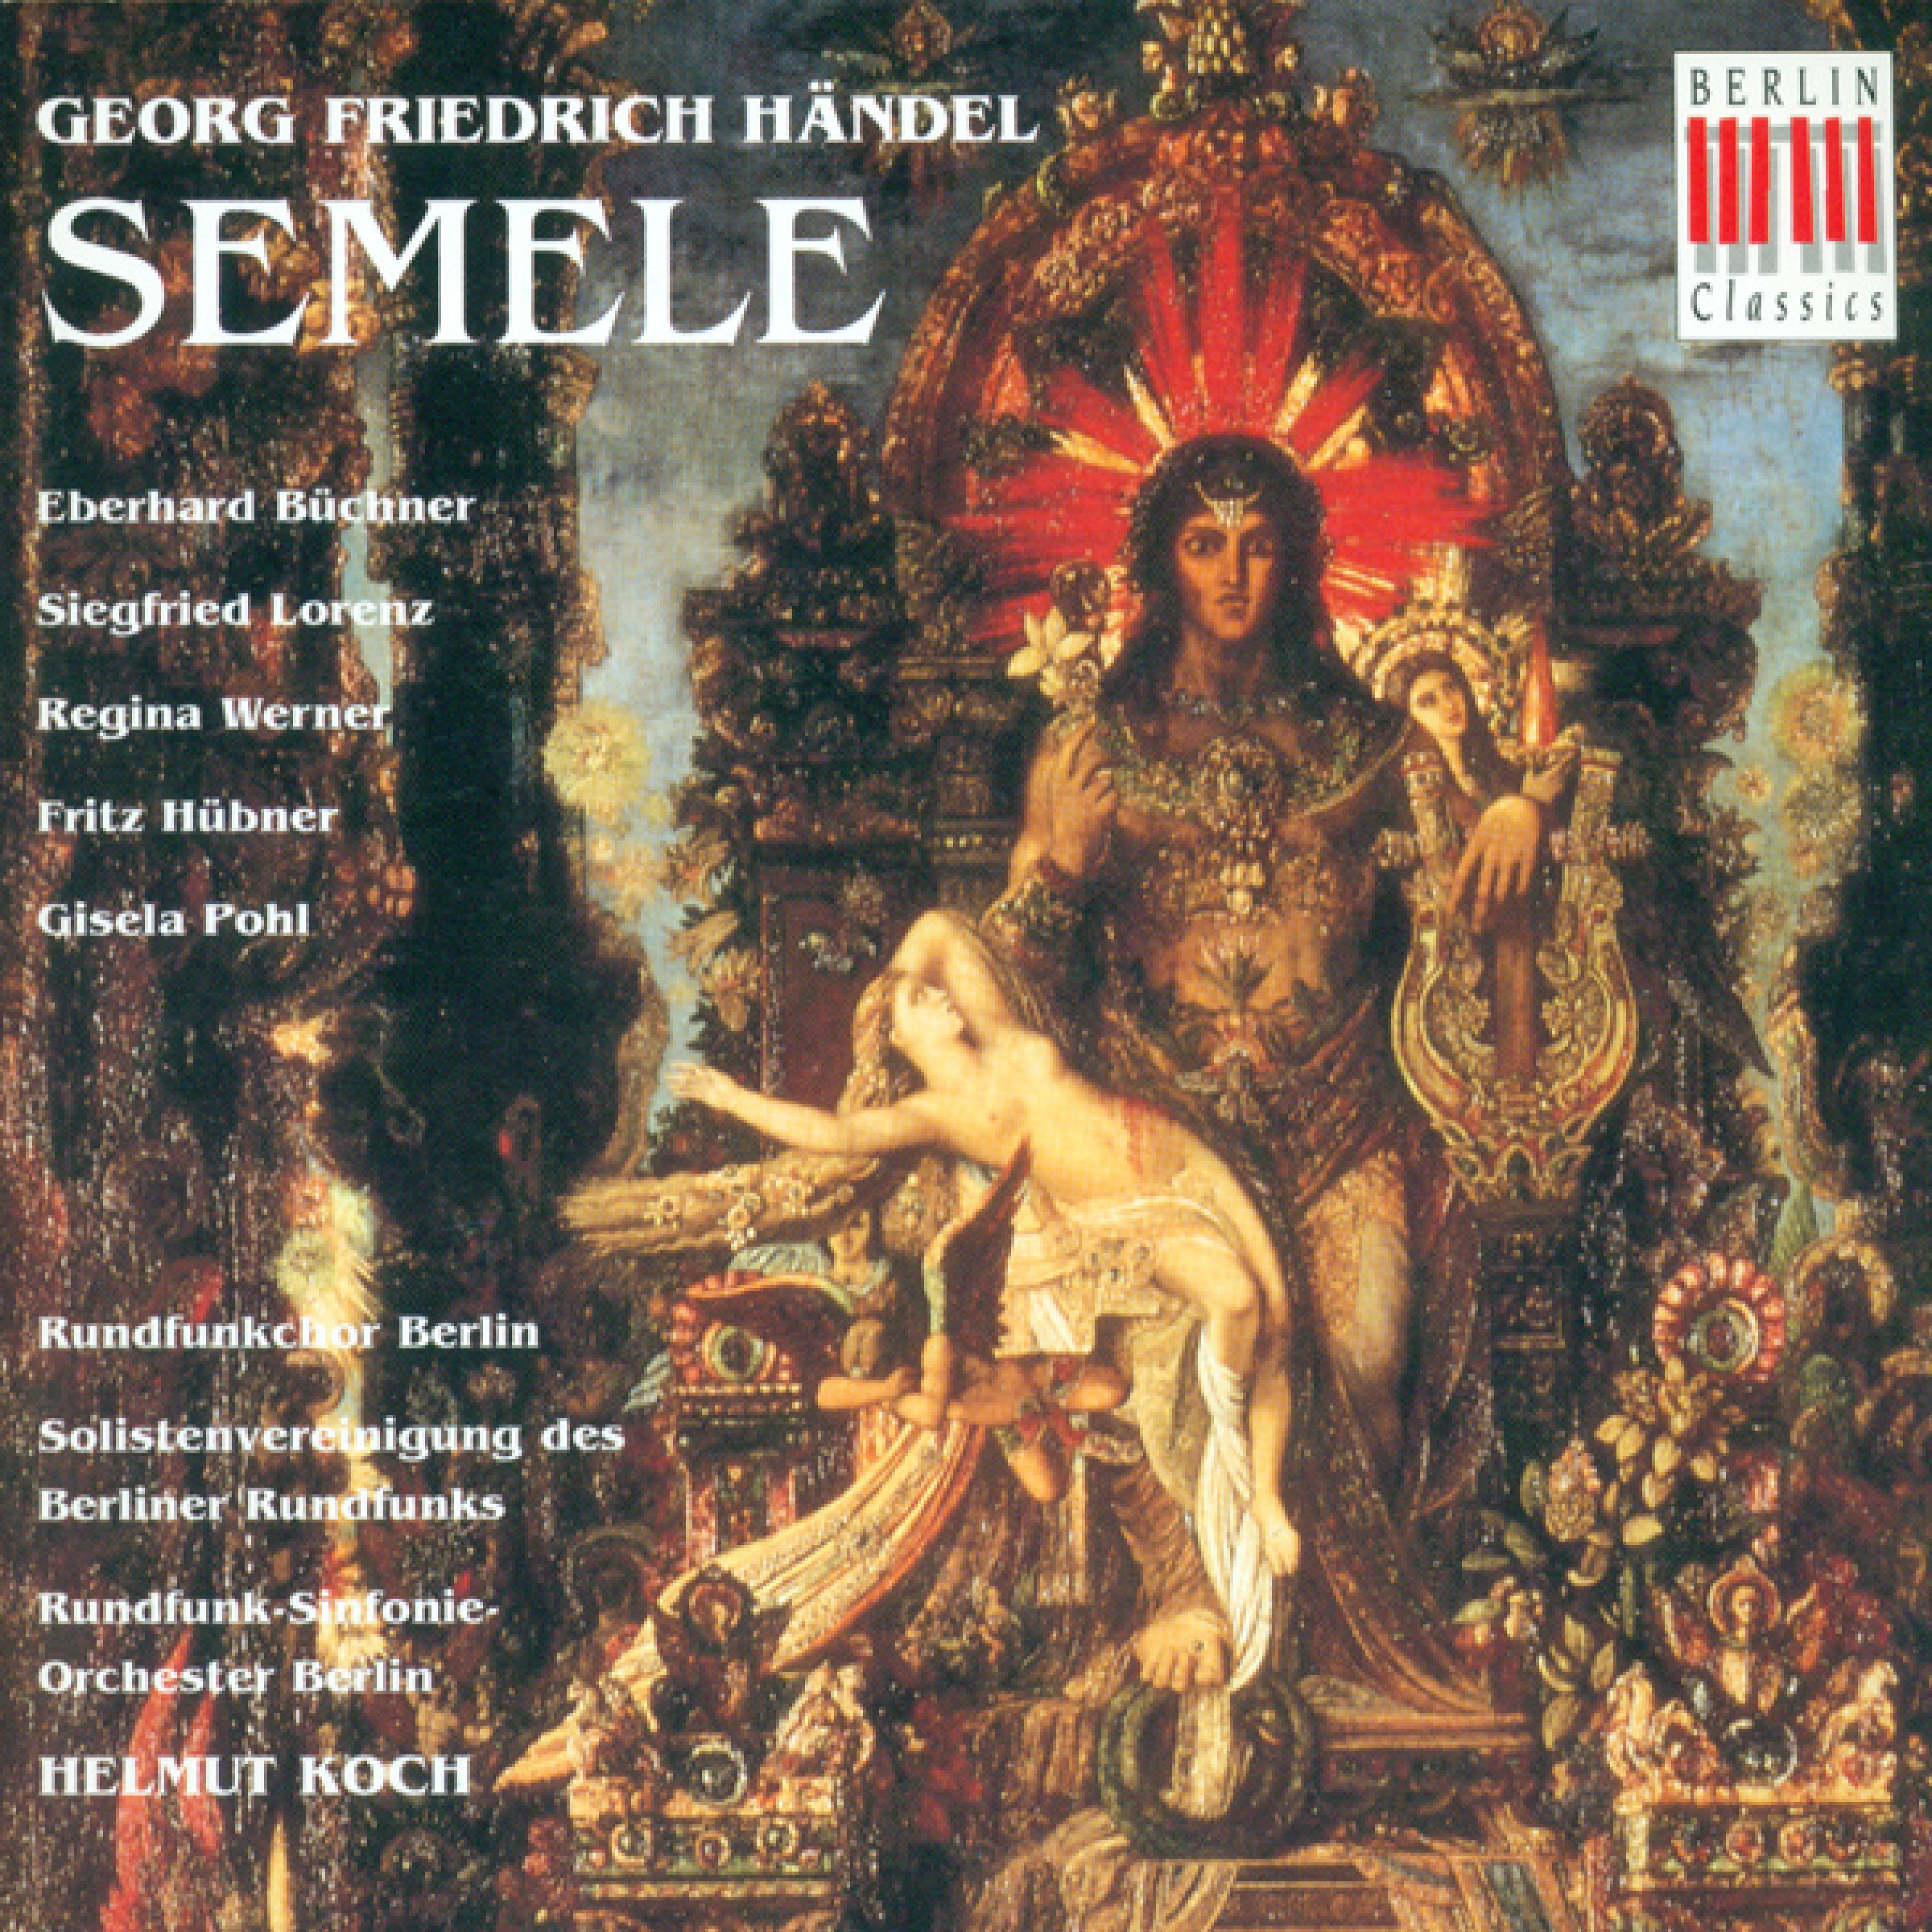 Semele, HWV 58: Act I - "See, see, Jove's Priests and holy Augurs come"